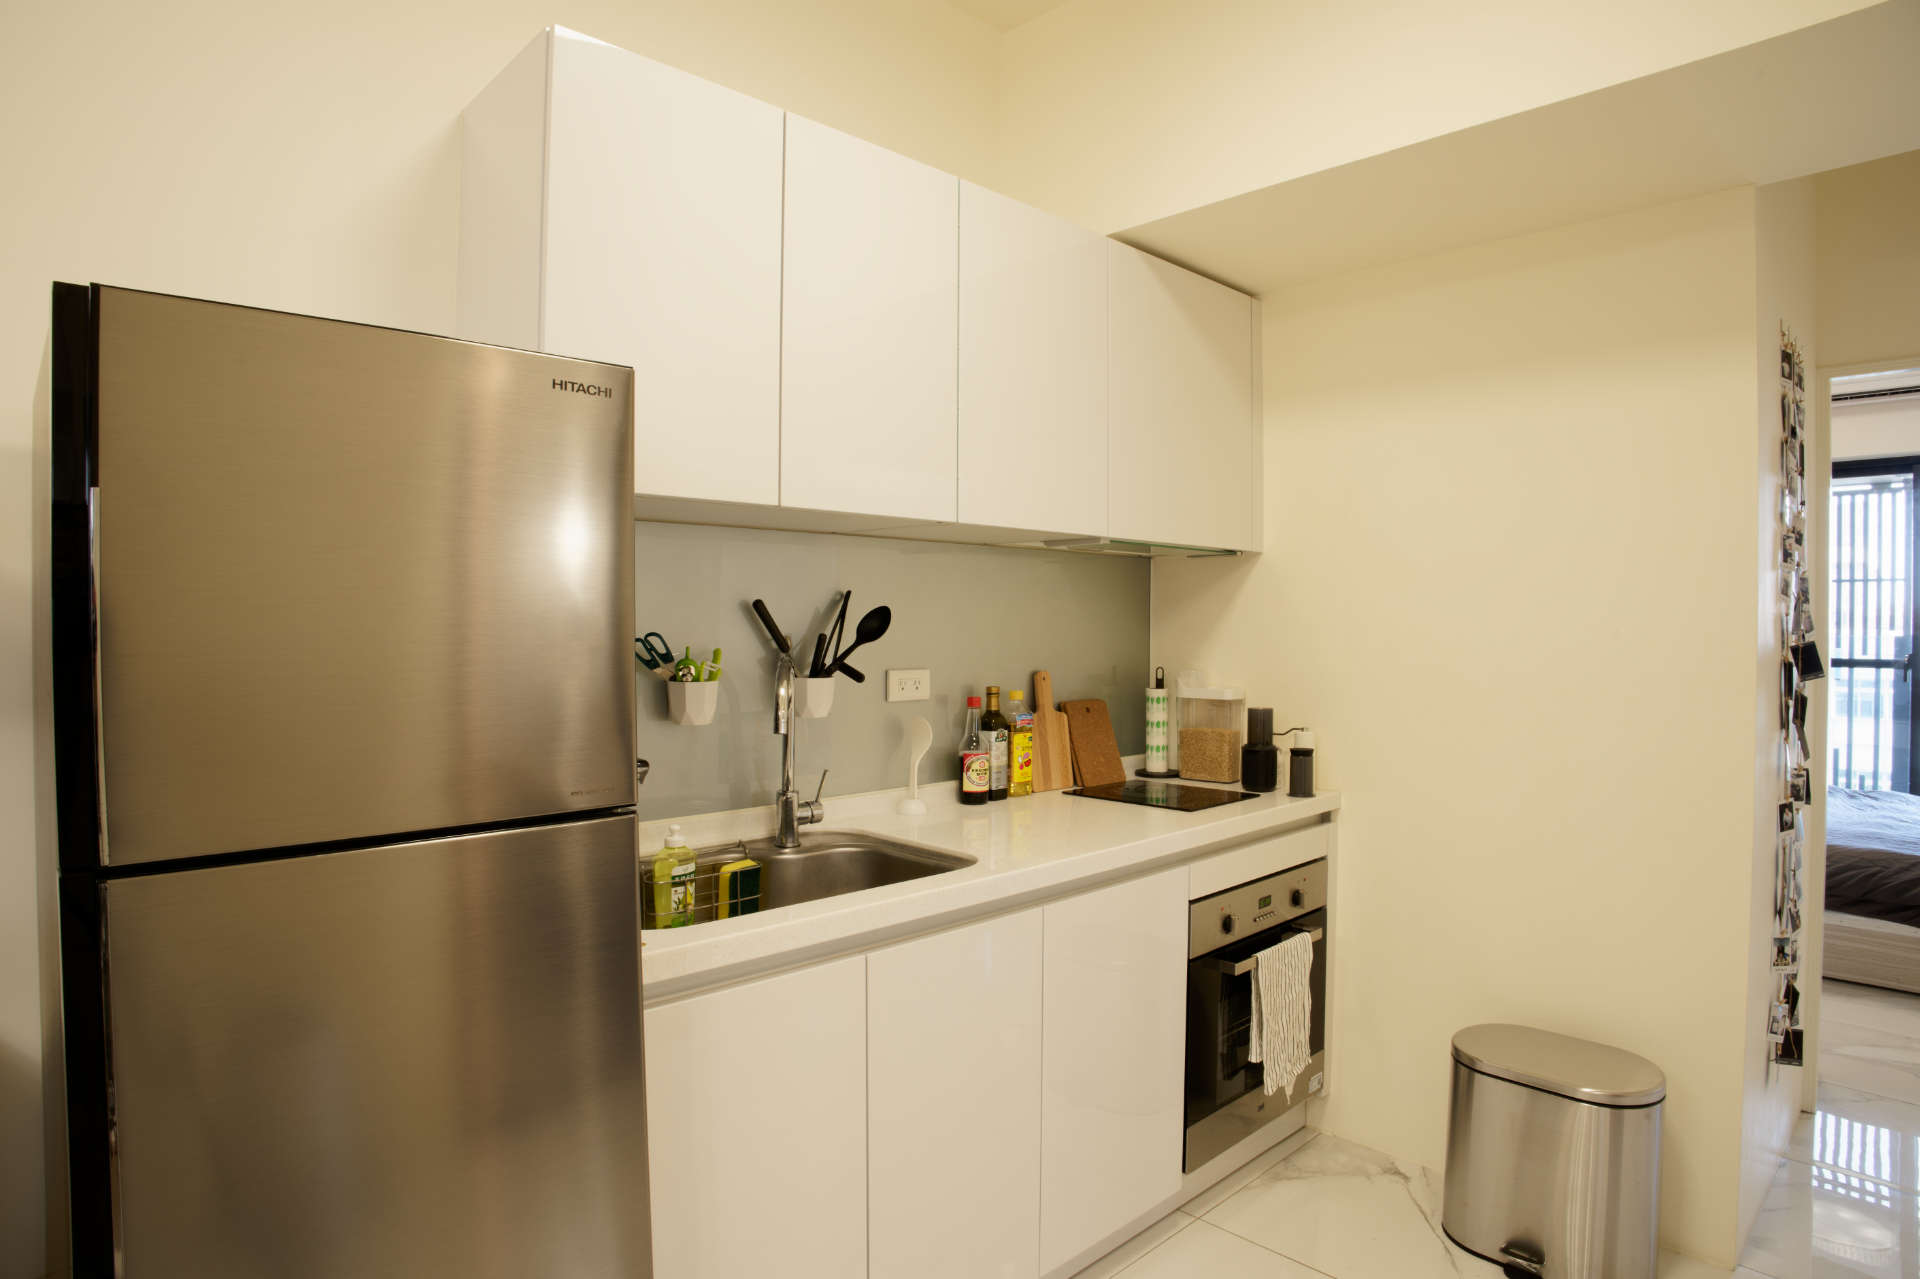 A kitchen with sink, induction cooktop, oven, fridge, and stainless steel trash bin.